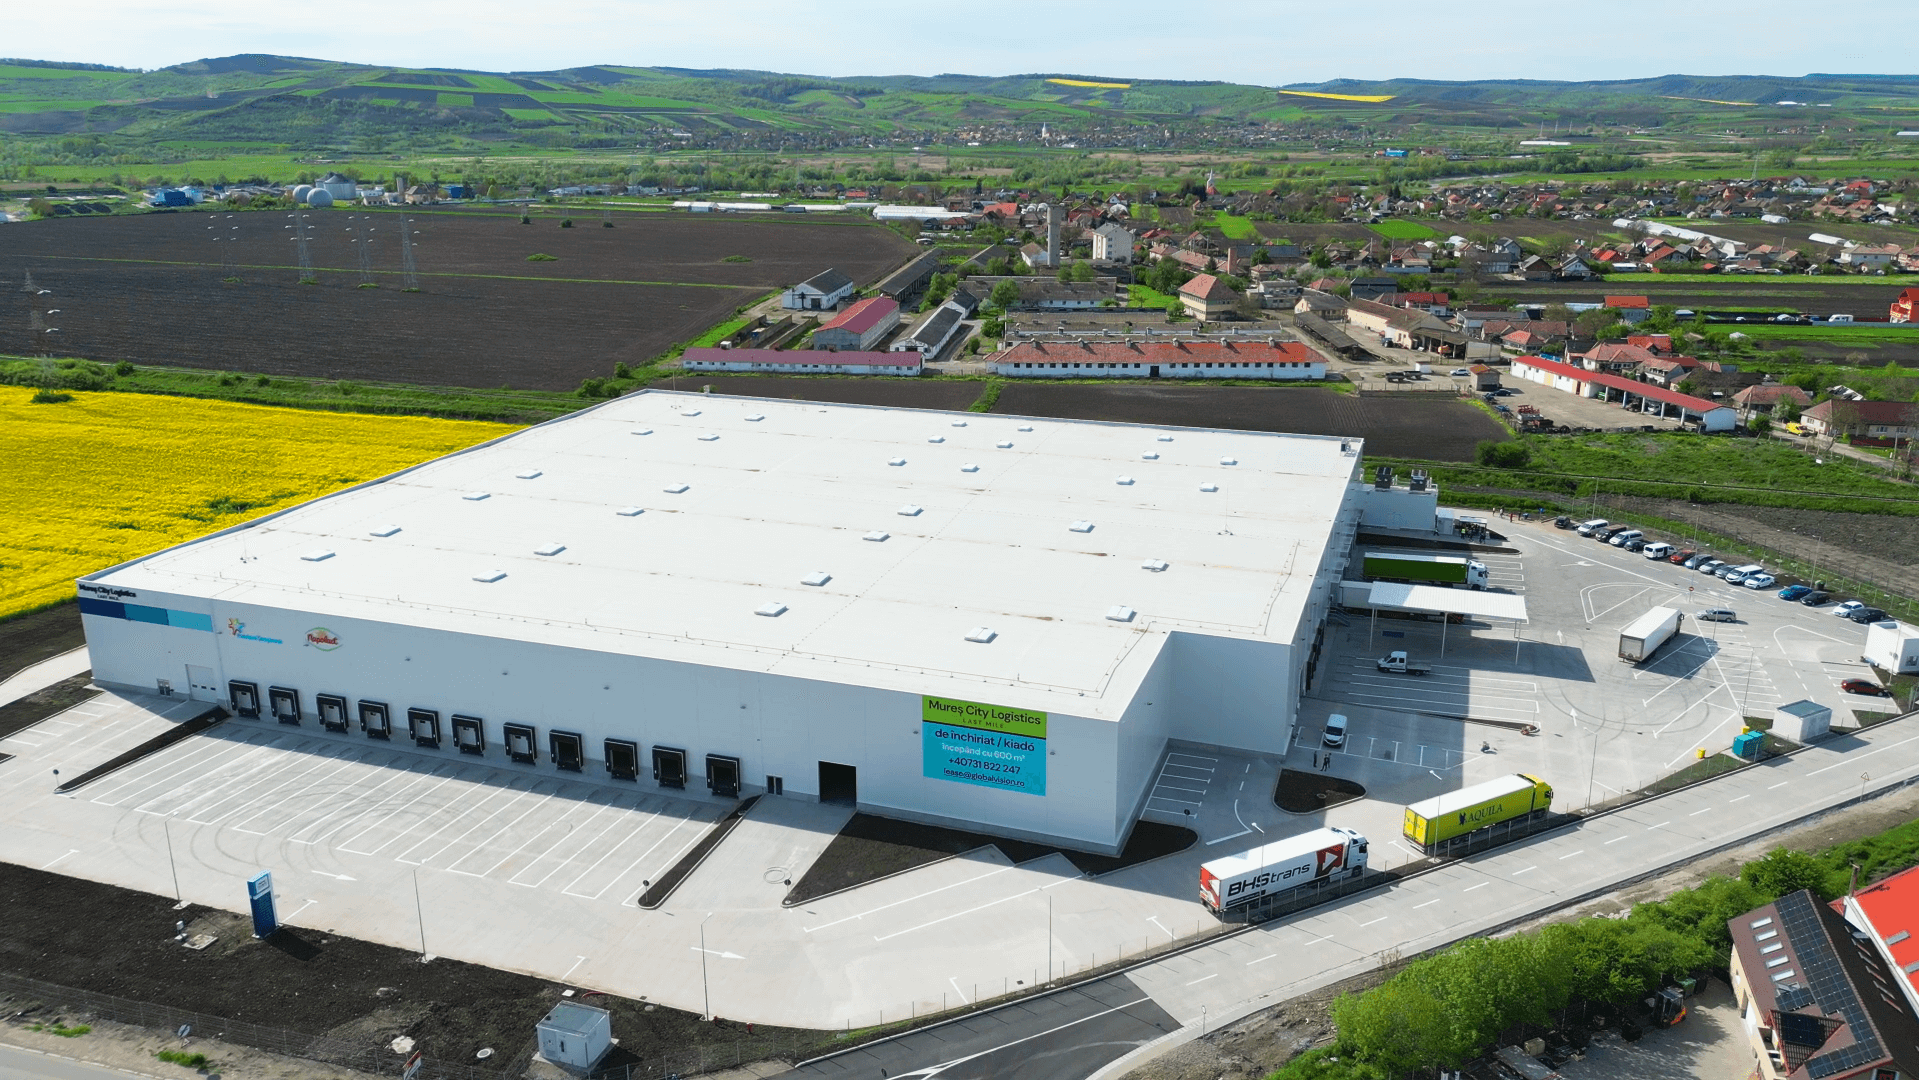 FrieslandCampina inaugurated the logistics center in Mureș, in partnership with Global Vision and Globalworth